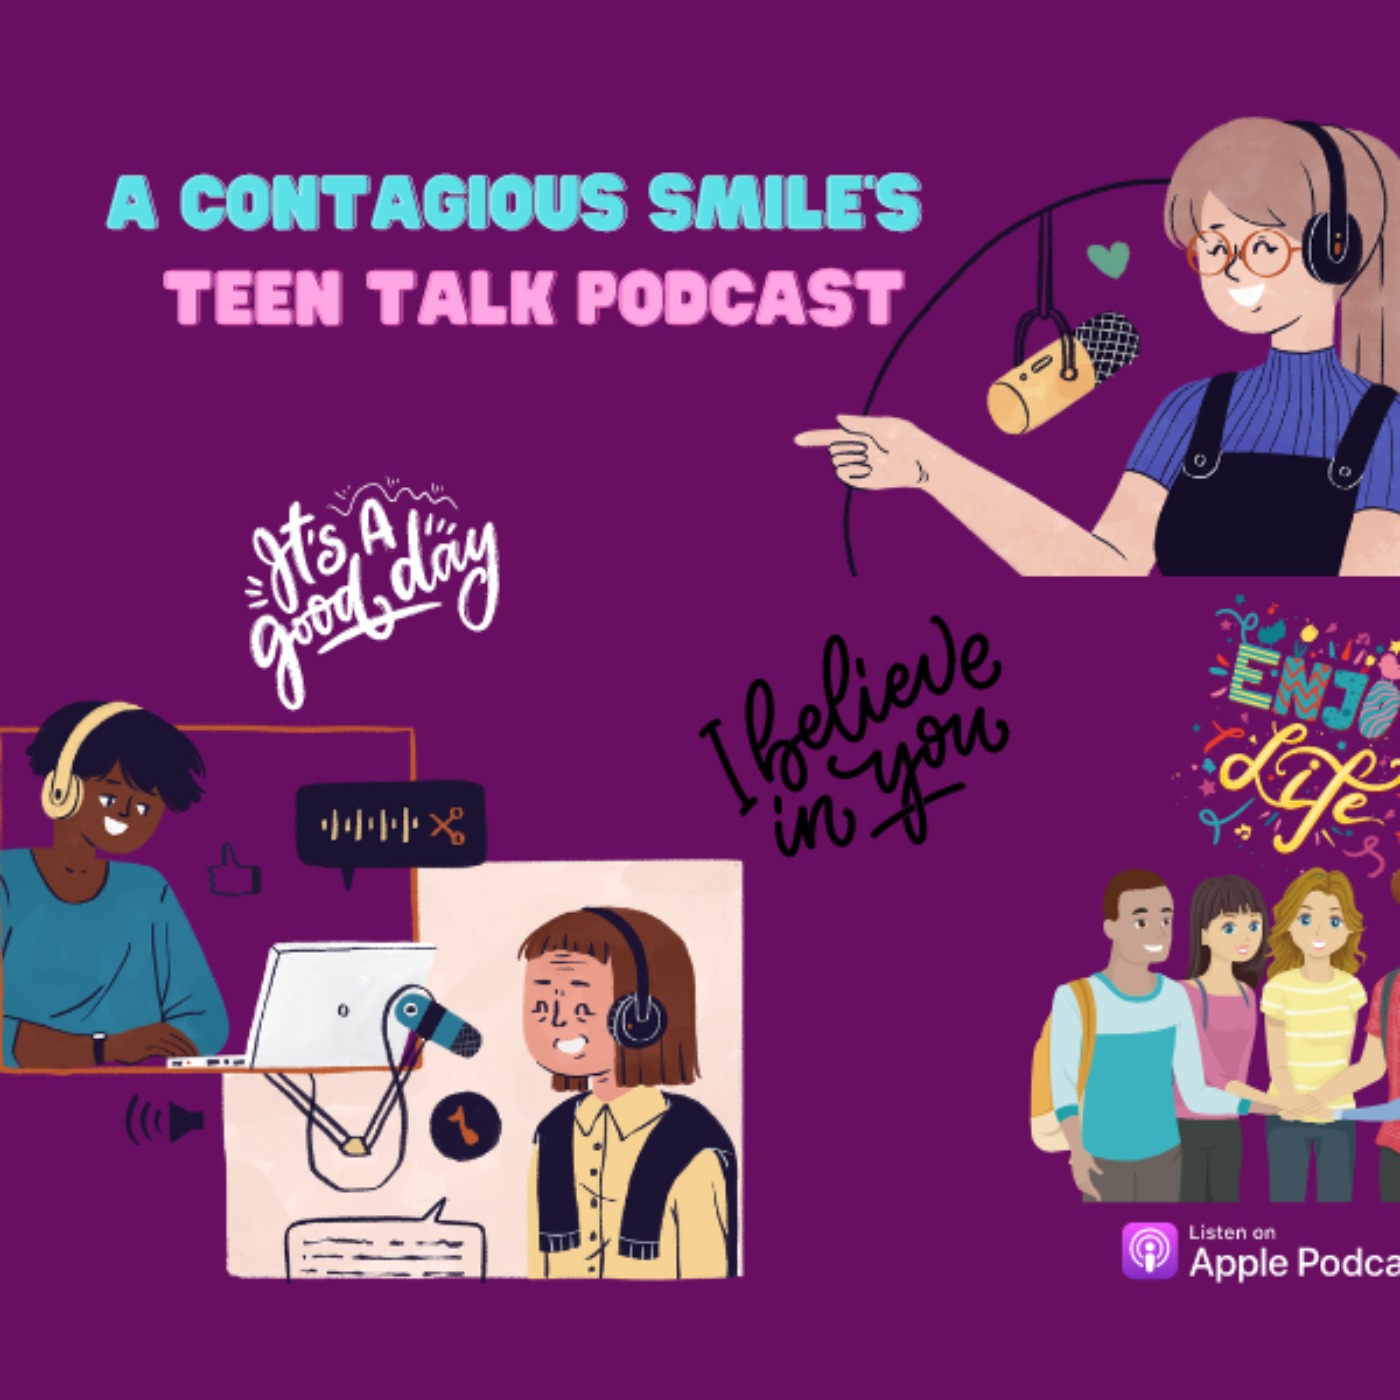 A Contagious Smile Brings You a Very Special Edition of Teen Talk Preparing for a Parent to Have Surgery